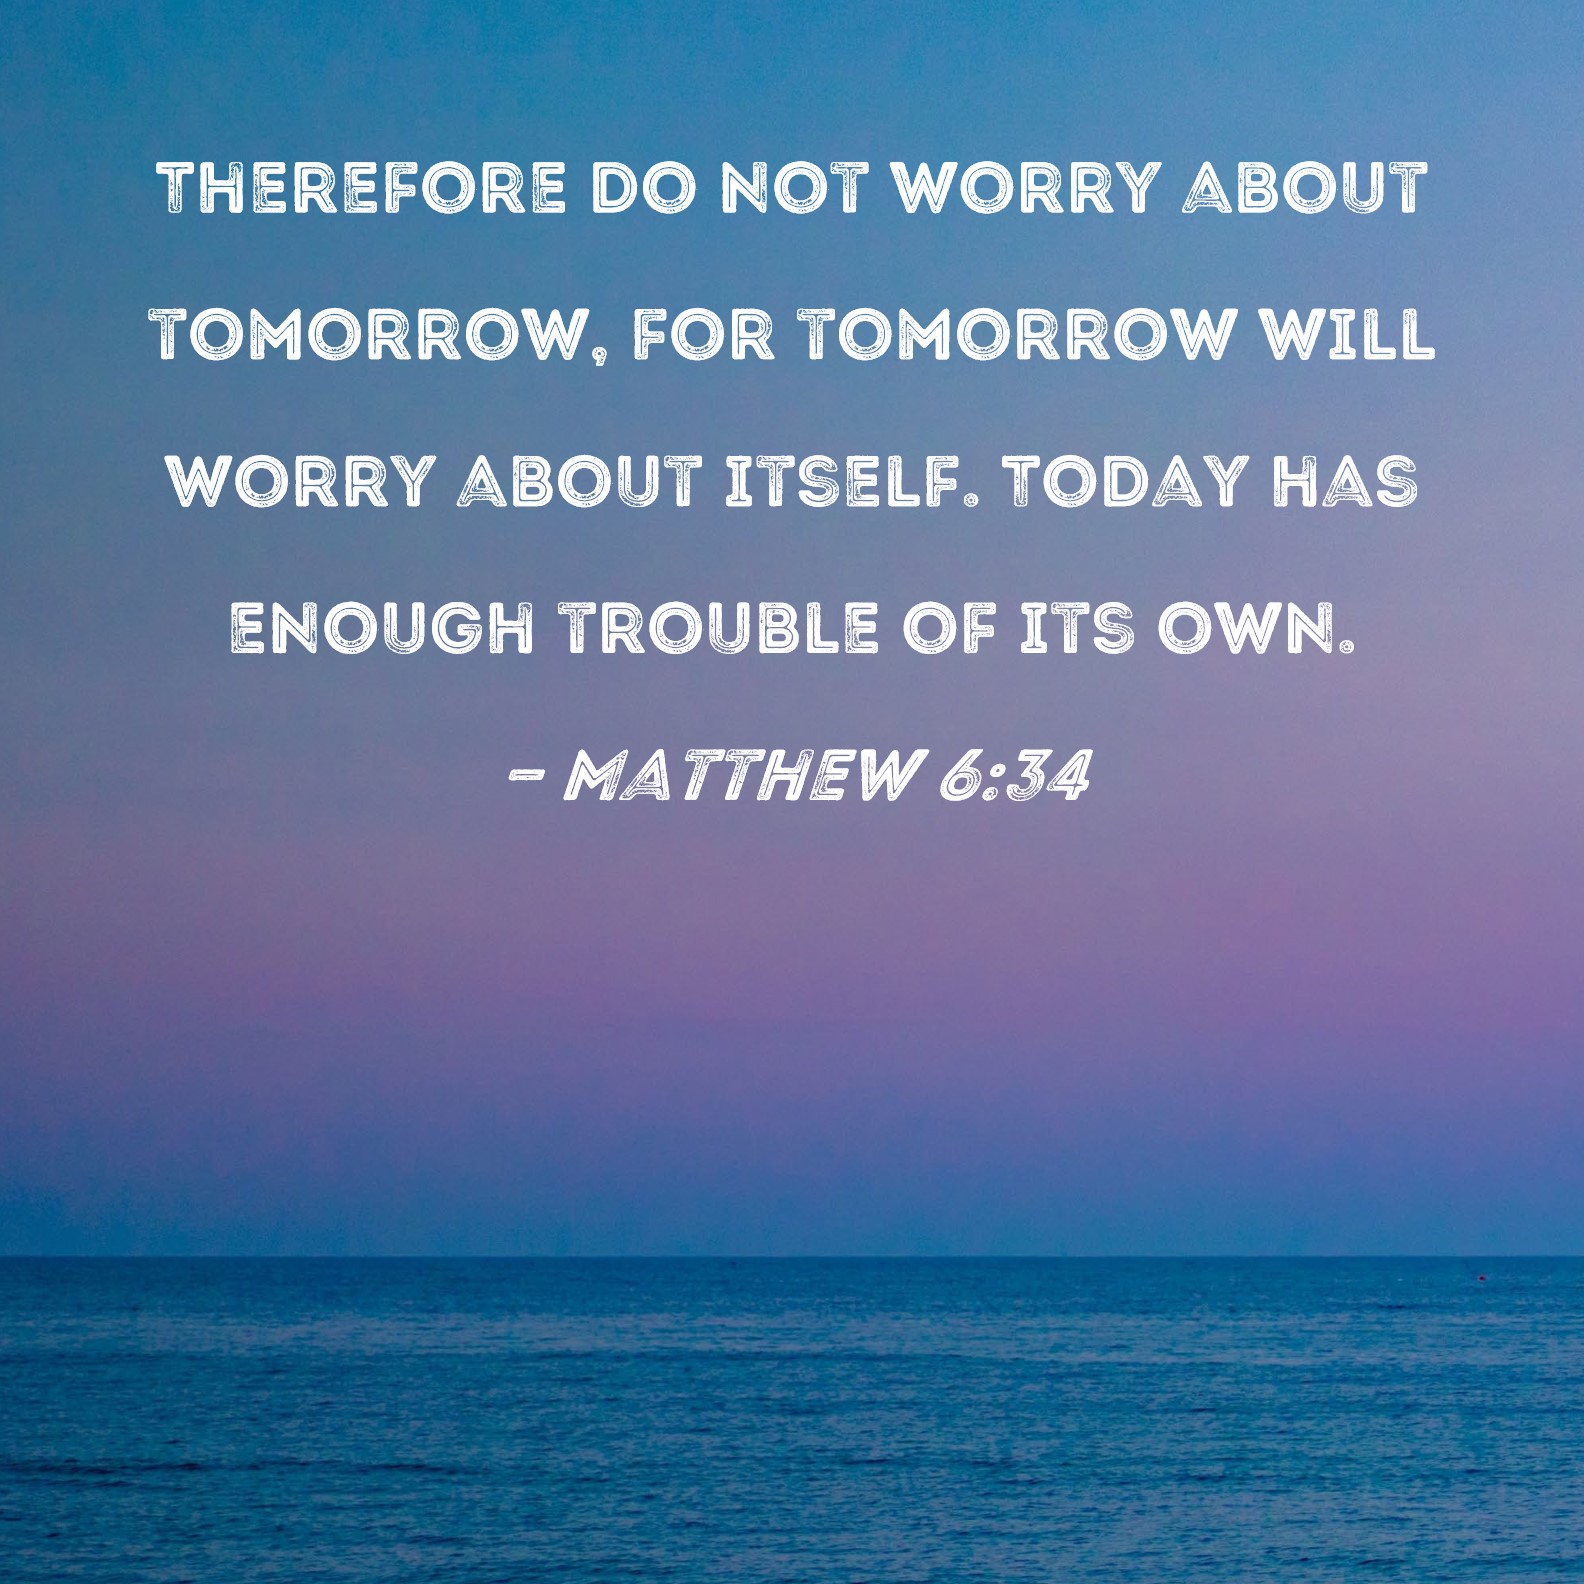 What does it mean that sufficient for the day is its own trouble (Matthew  6:34)?